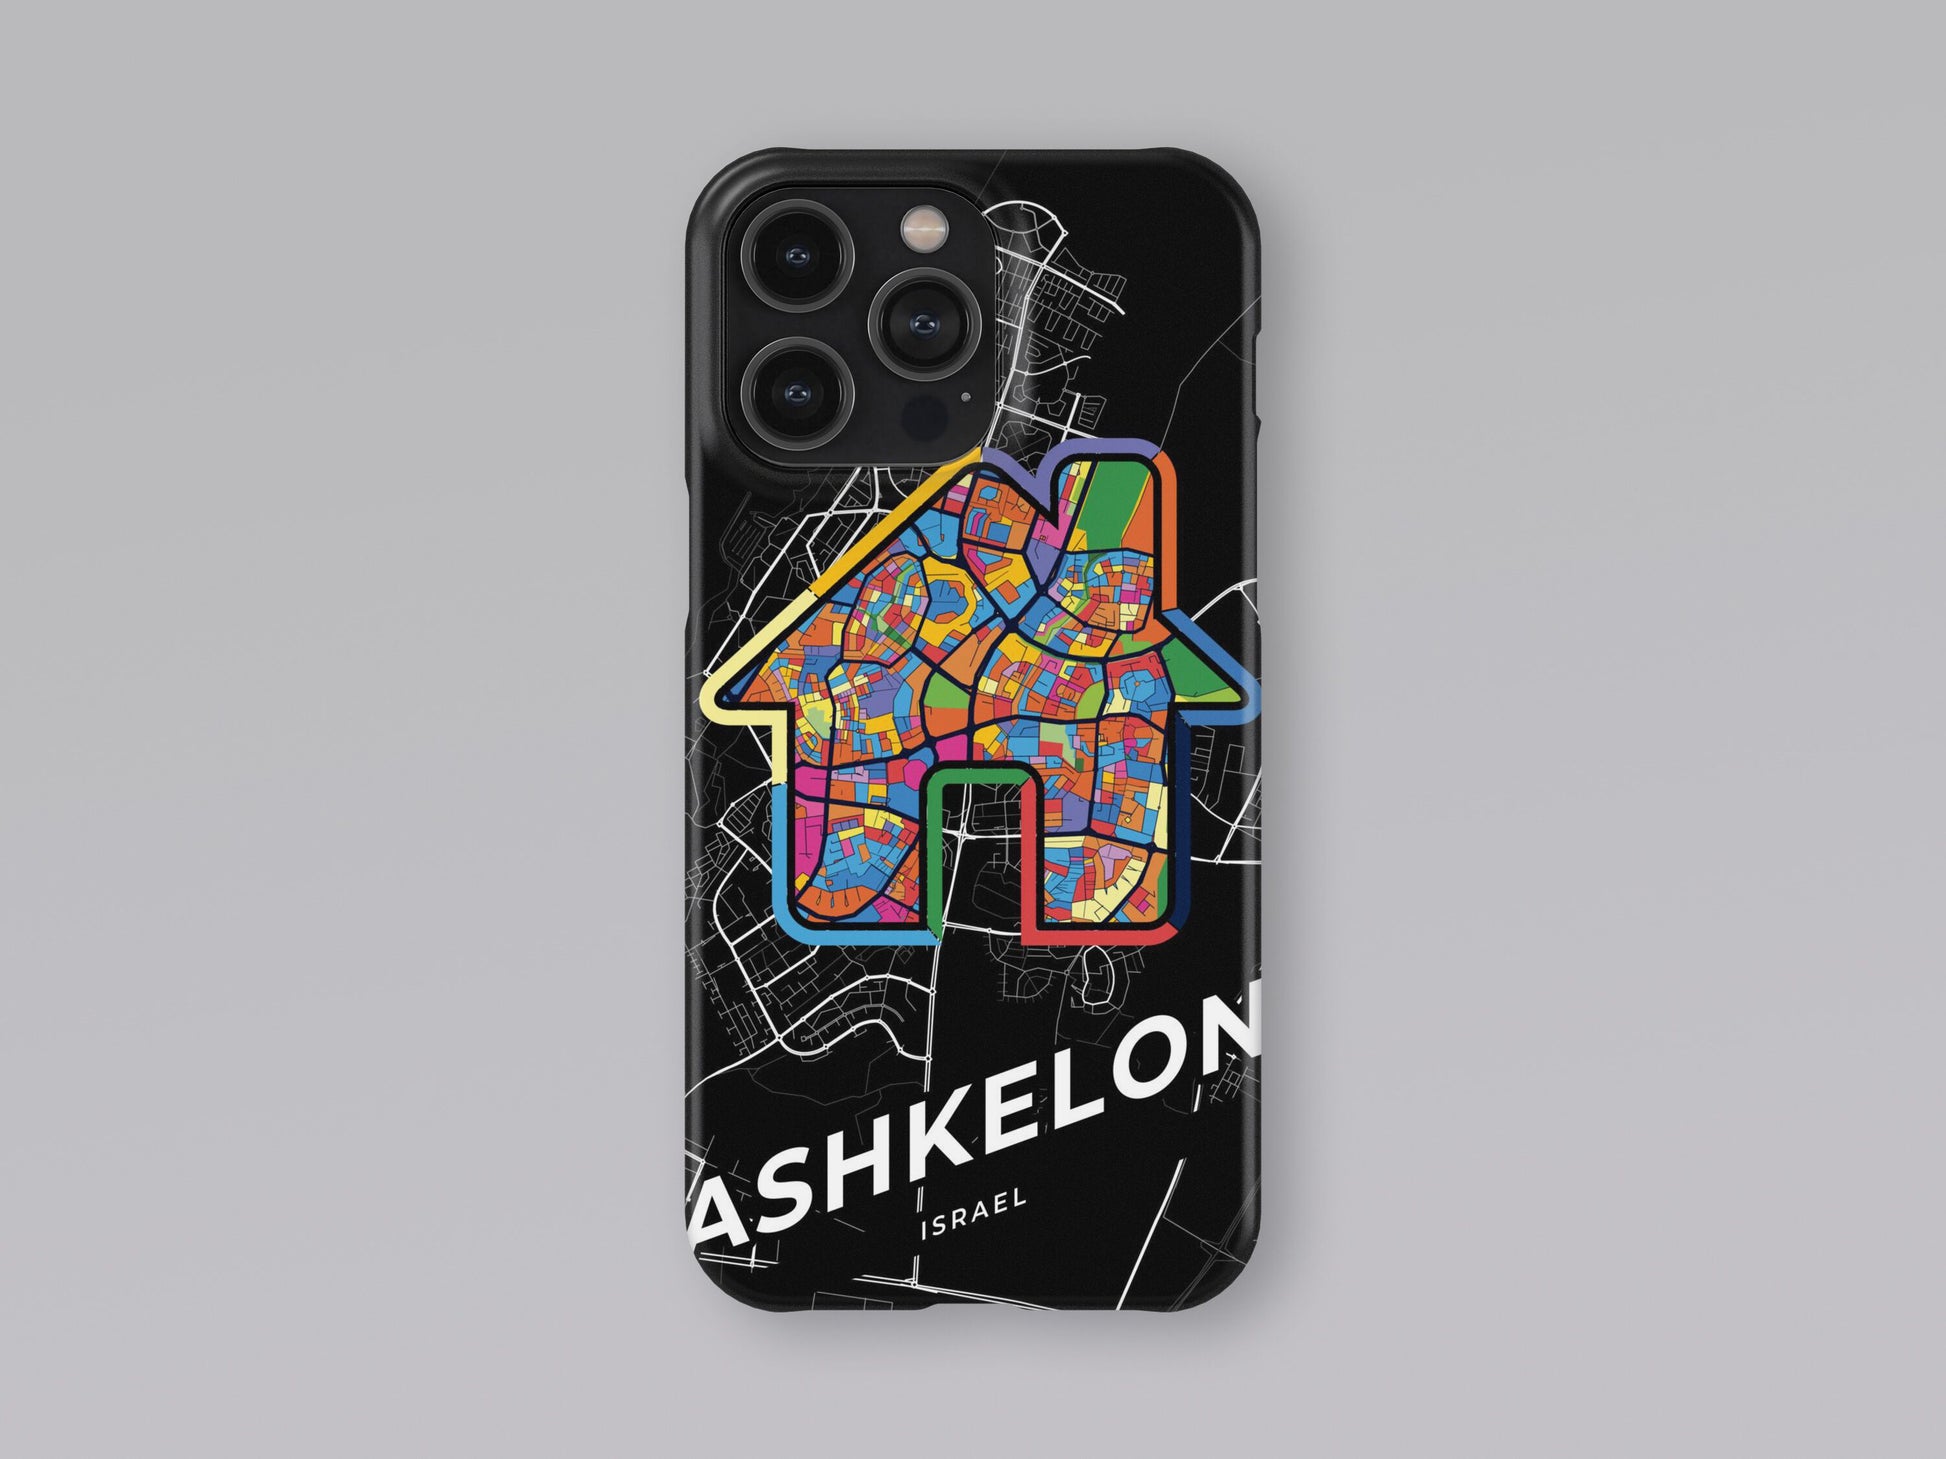 Ashkelon Israel slim phone case with colorful icon. Birthday, wedding or housewarming gift. Couple match cases. 3